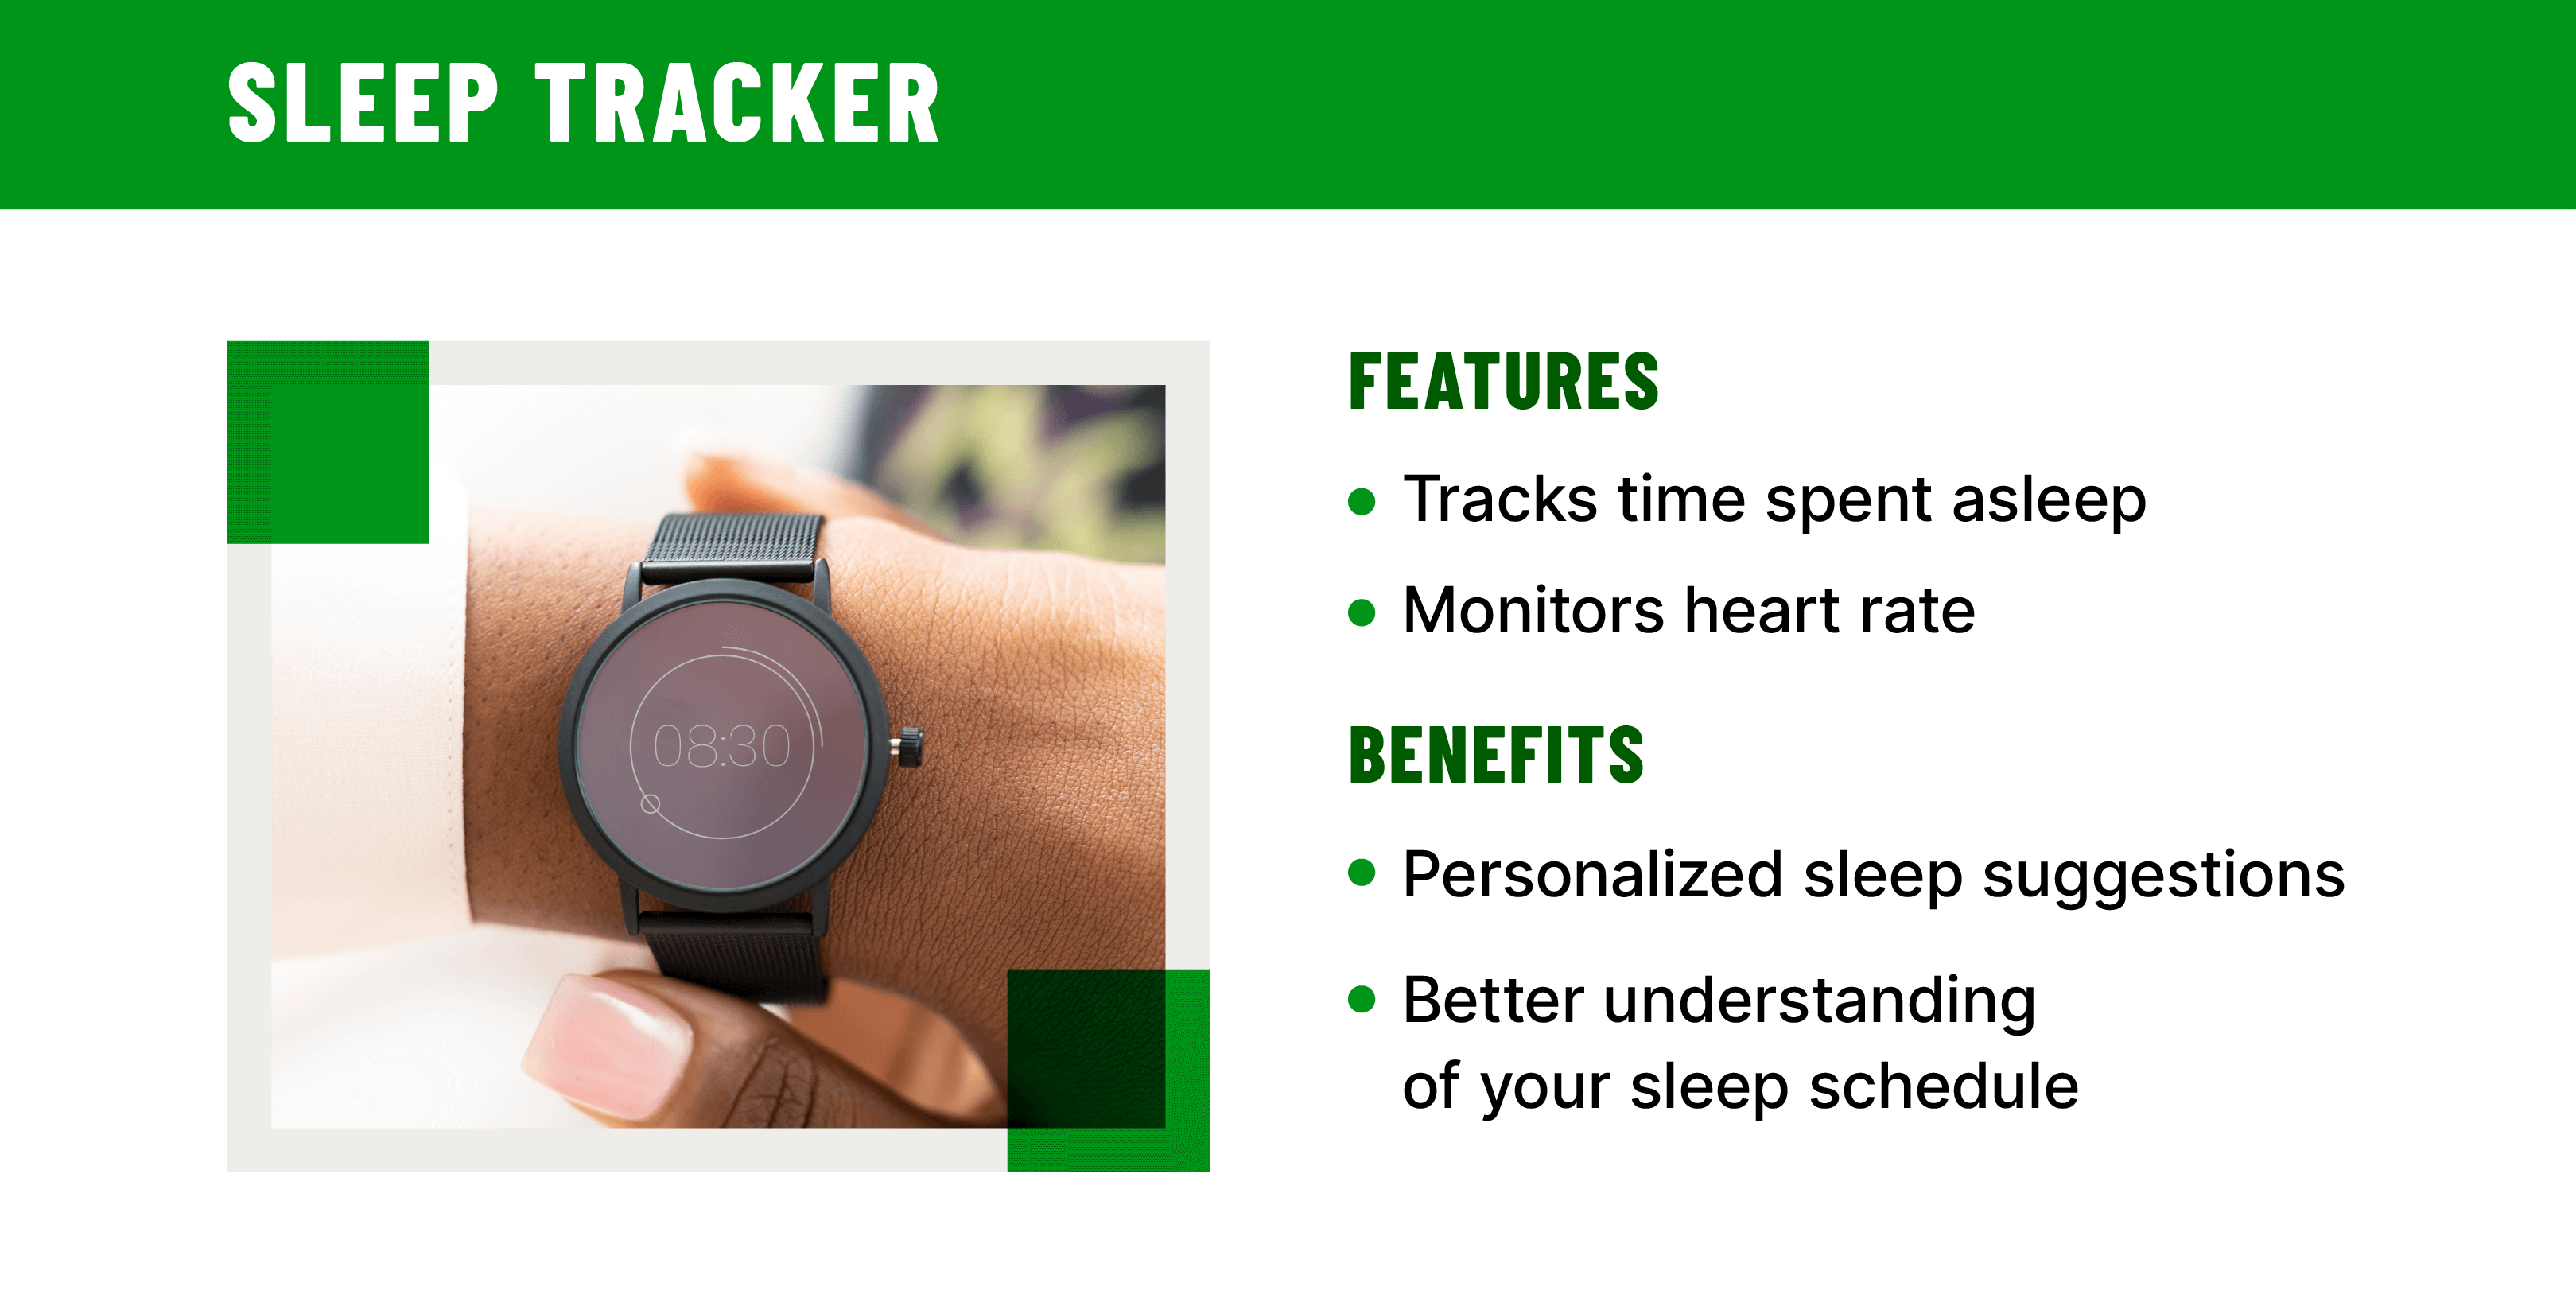 Image of a smart watch on someone's wrist with text describing the features and benefits